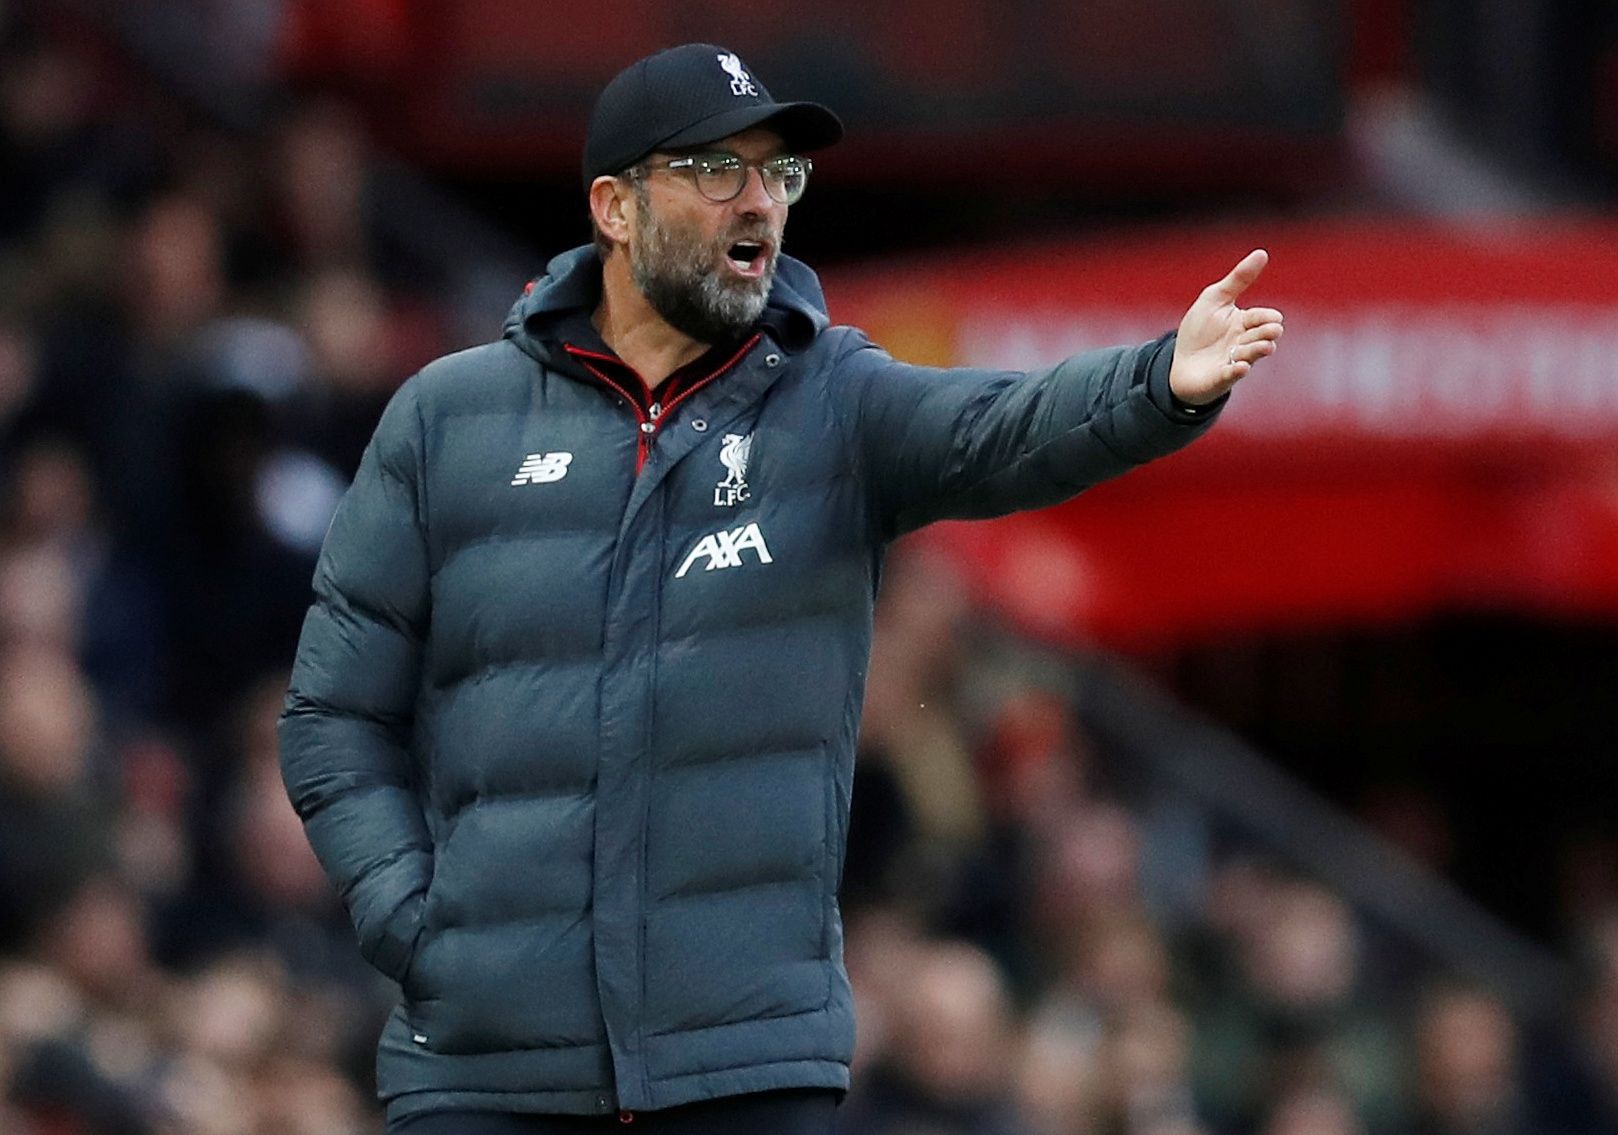 Soccer Football - Premier League - Manchester United v Liverpool - Old Trafford, Manchester, Britain - October 20, 2019  Liverpool manager Juergen Klopp reacts  REUTERS/Russell Cheyne  EDITORIAL USE ONLY. No use with unauthorized audio, video, data, fixture lists, club/league logos or 